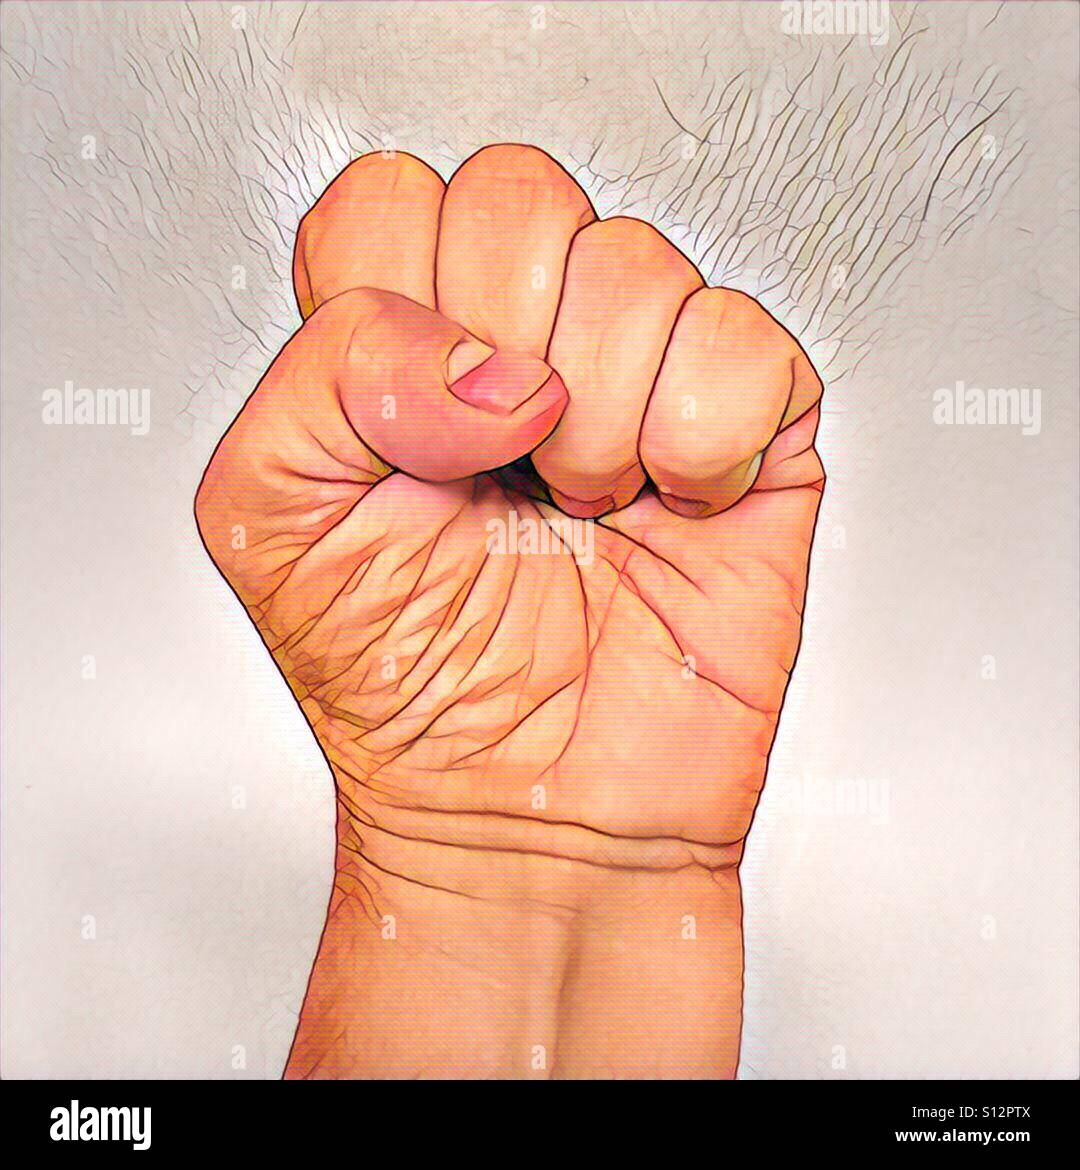 One of a series of 7 artistic renderings of a hand making different formations.  This is a fist sign or symbol. Stock Photo